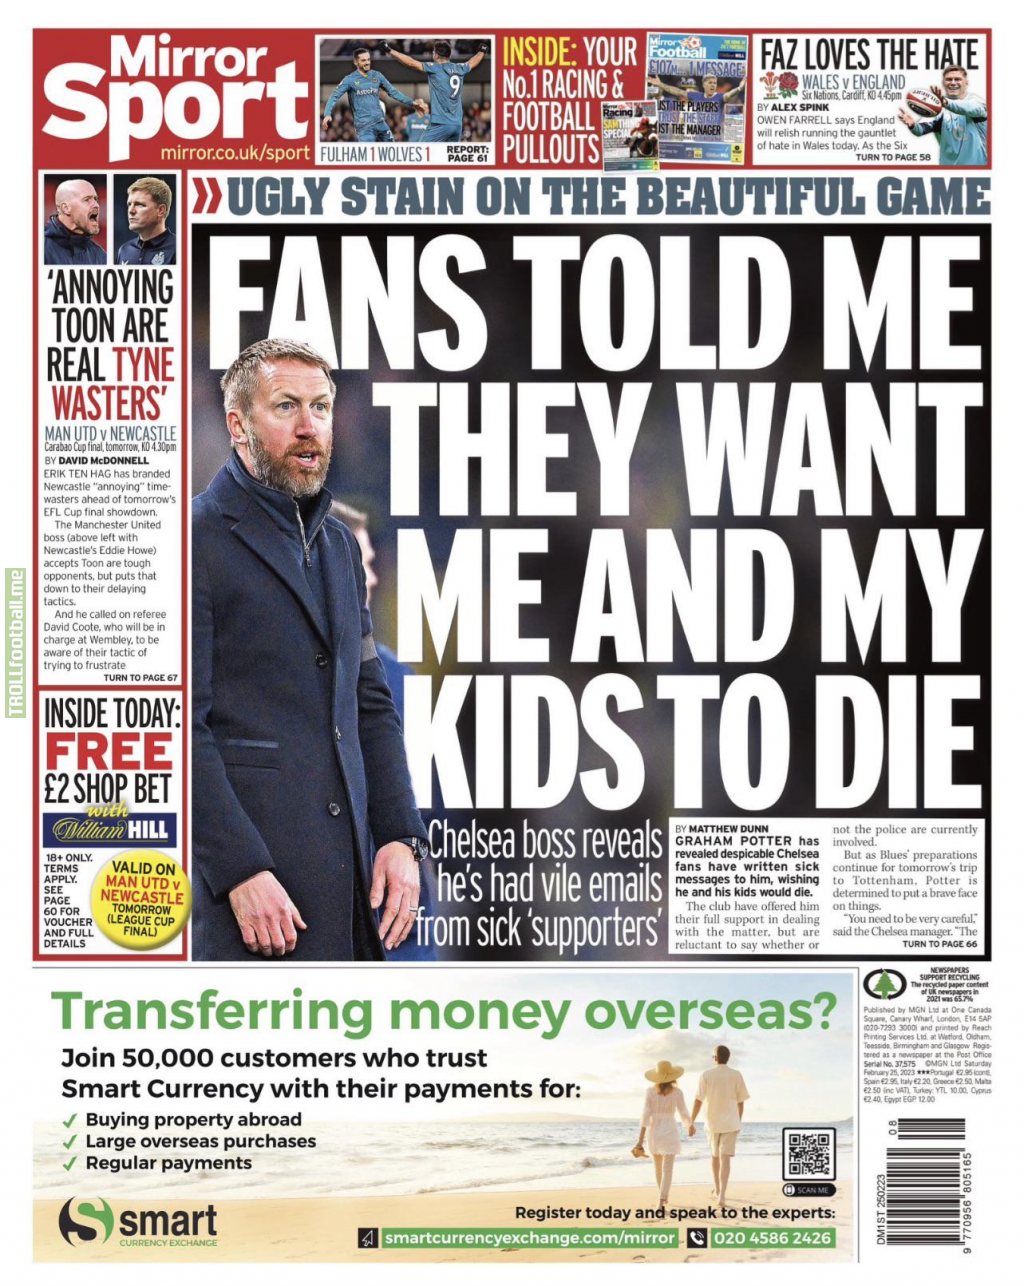 [Fabrizio Romano] Graham Potter on Mirror front page: “Fans told me they want me and my kids to die”. #CFC “You need to be very careful”, he added. Mirror reporting that “Potter has had vile emails from sick ‘supporters’”.